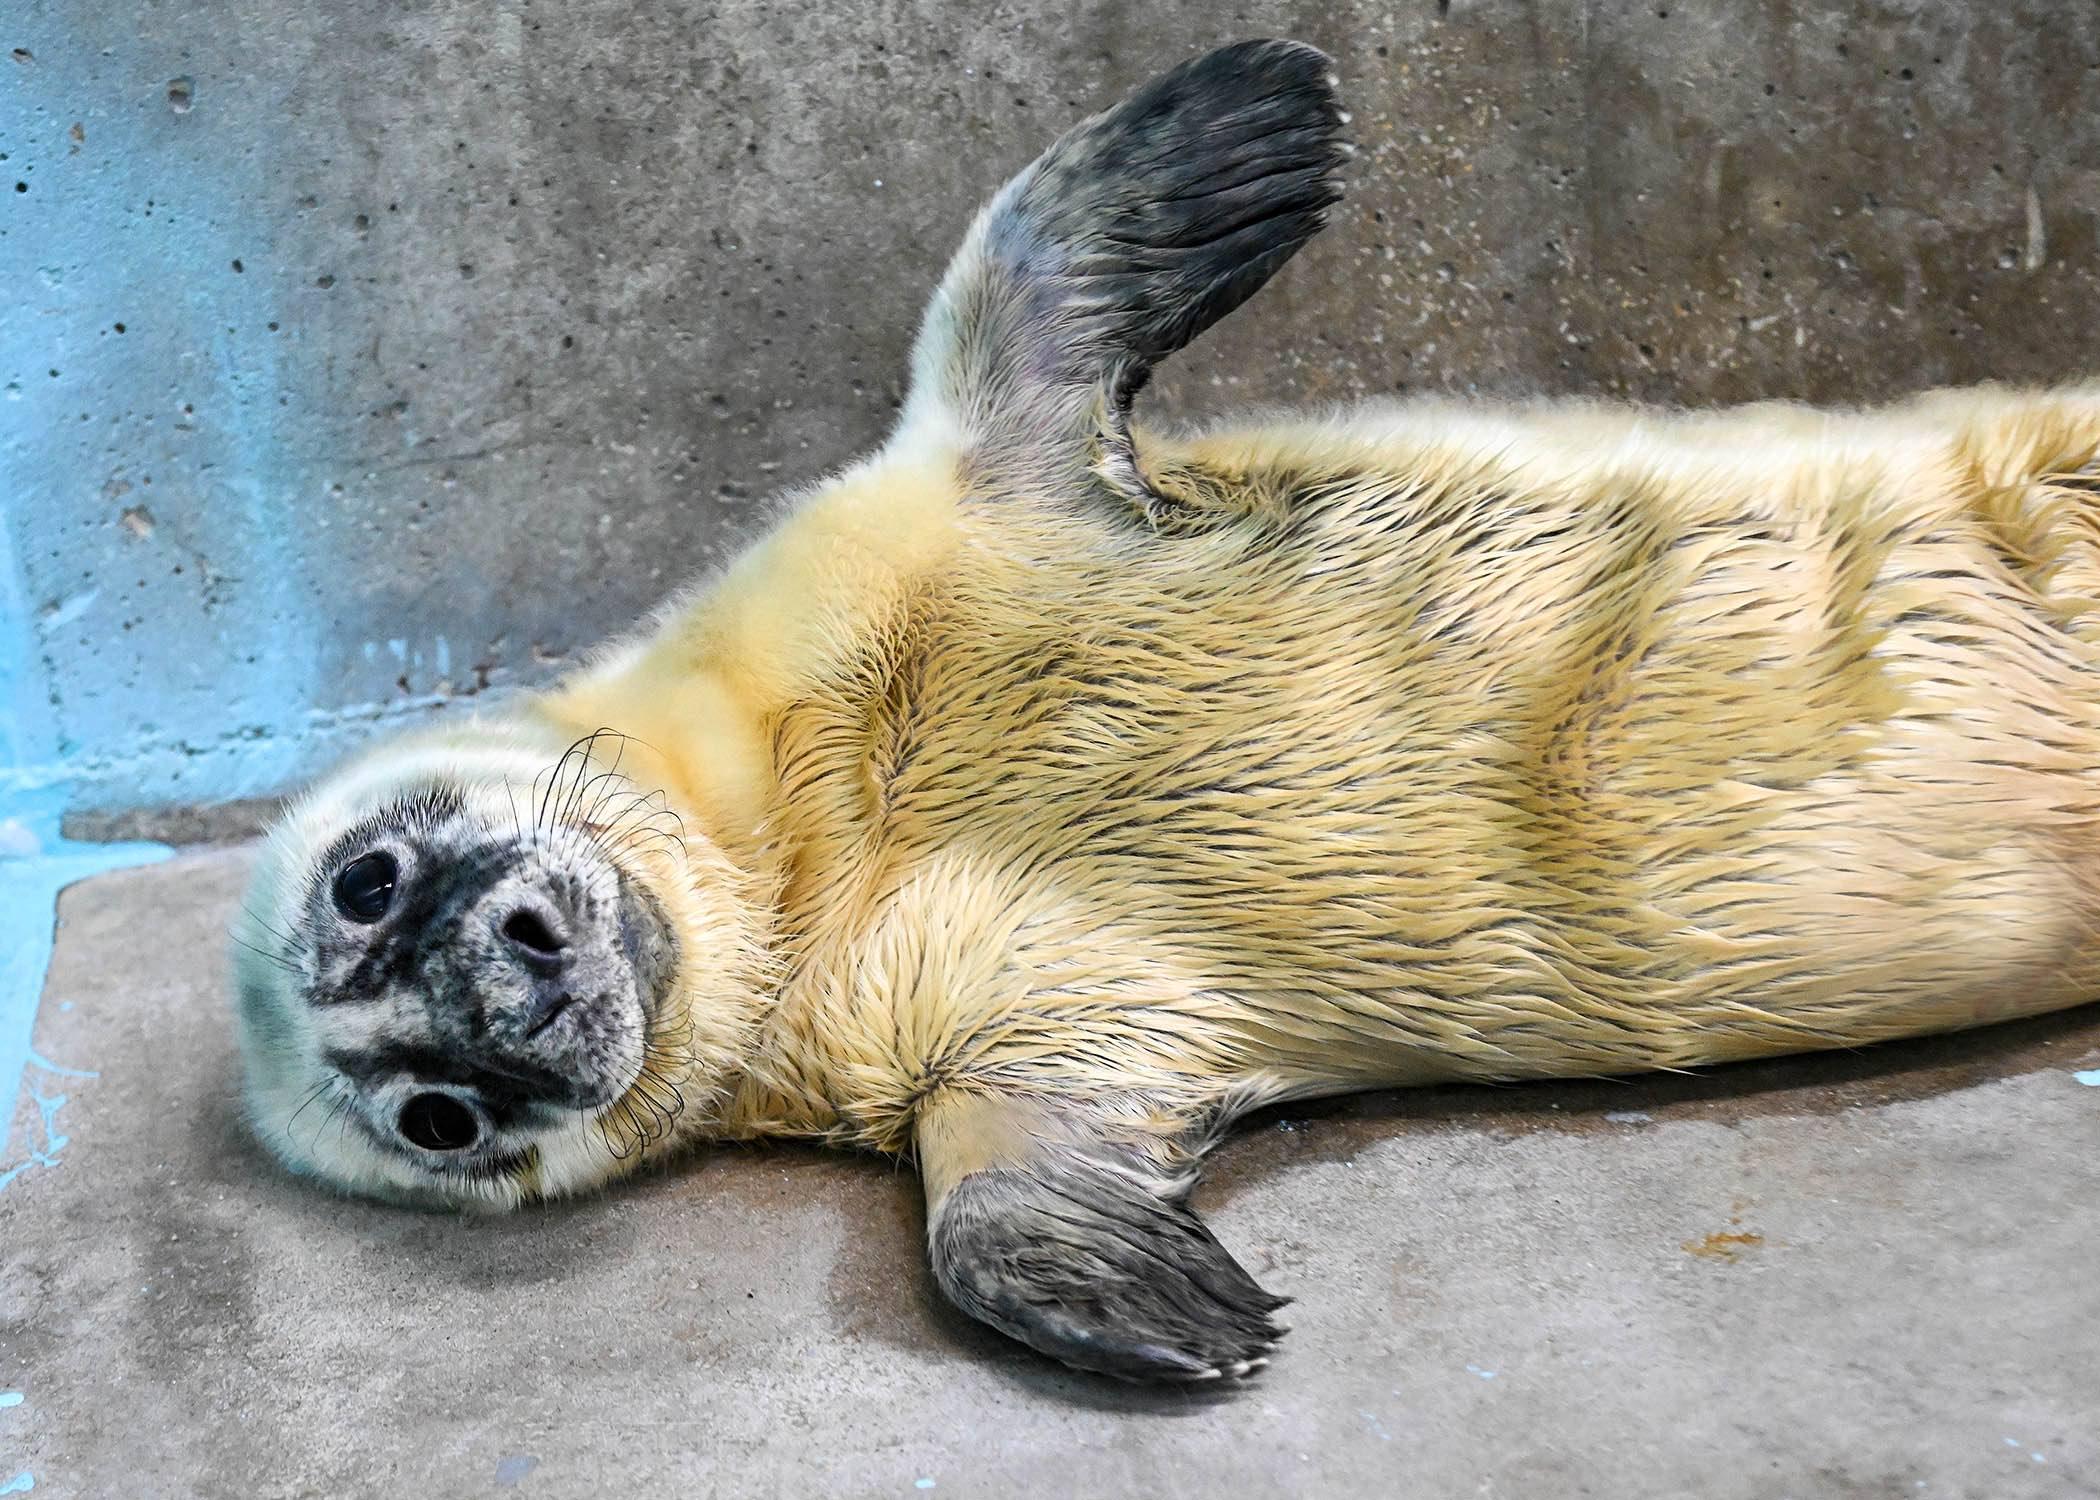 This pup’s a born swimmer. Seals may look clumsy on land, but in the water, they can reach speeds topping 20 miles per hour. (Courtesy of Brookfield Zoo)